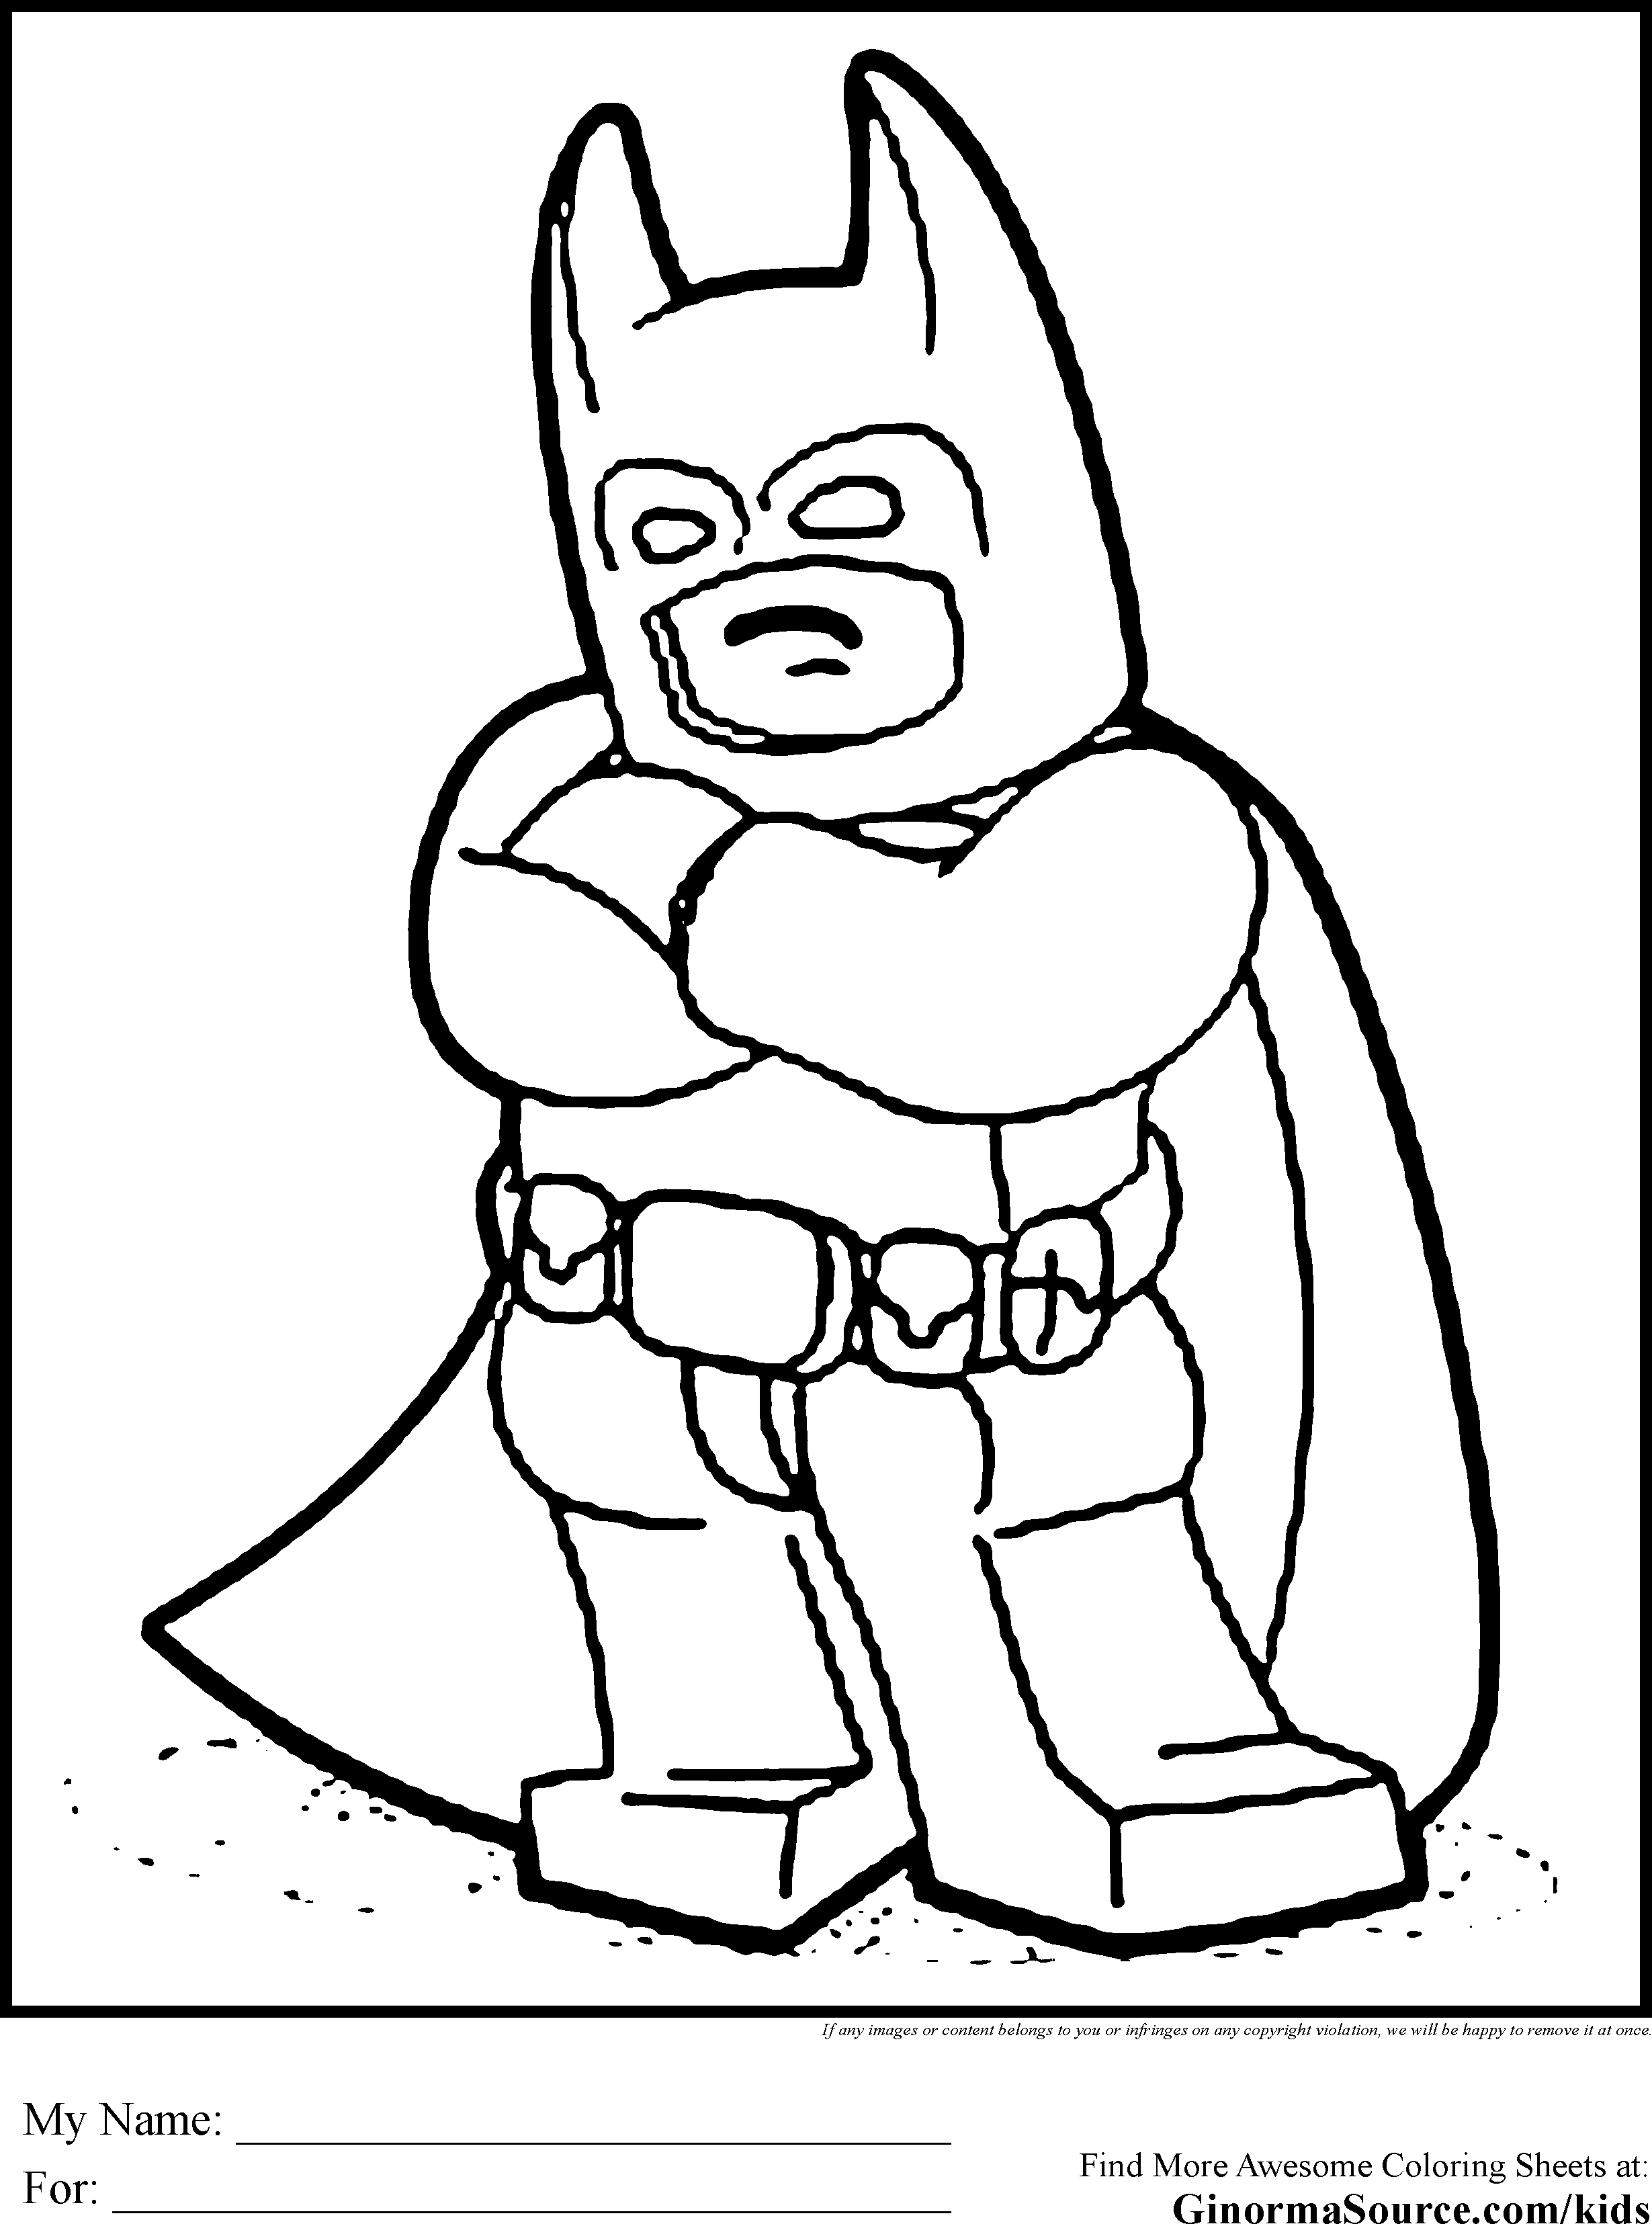 The Lego Batman Movie Coloring Pages Coloring Home